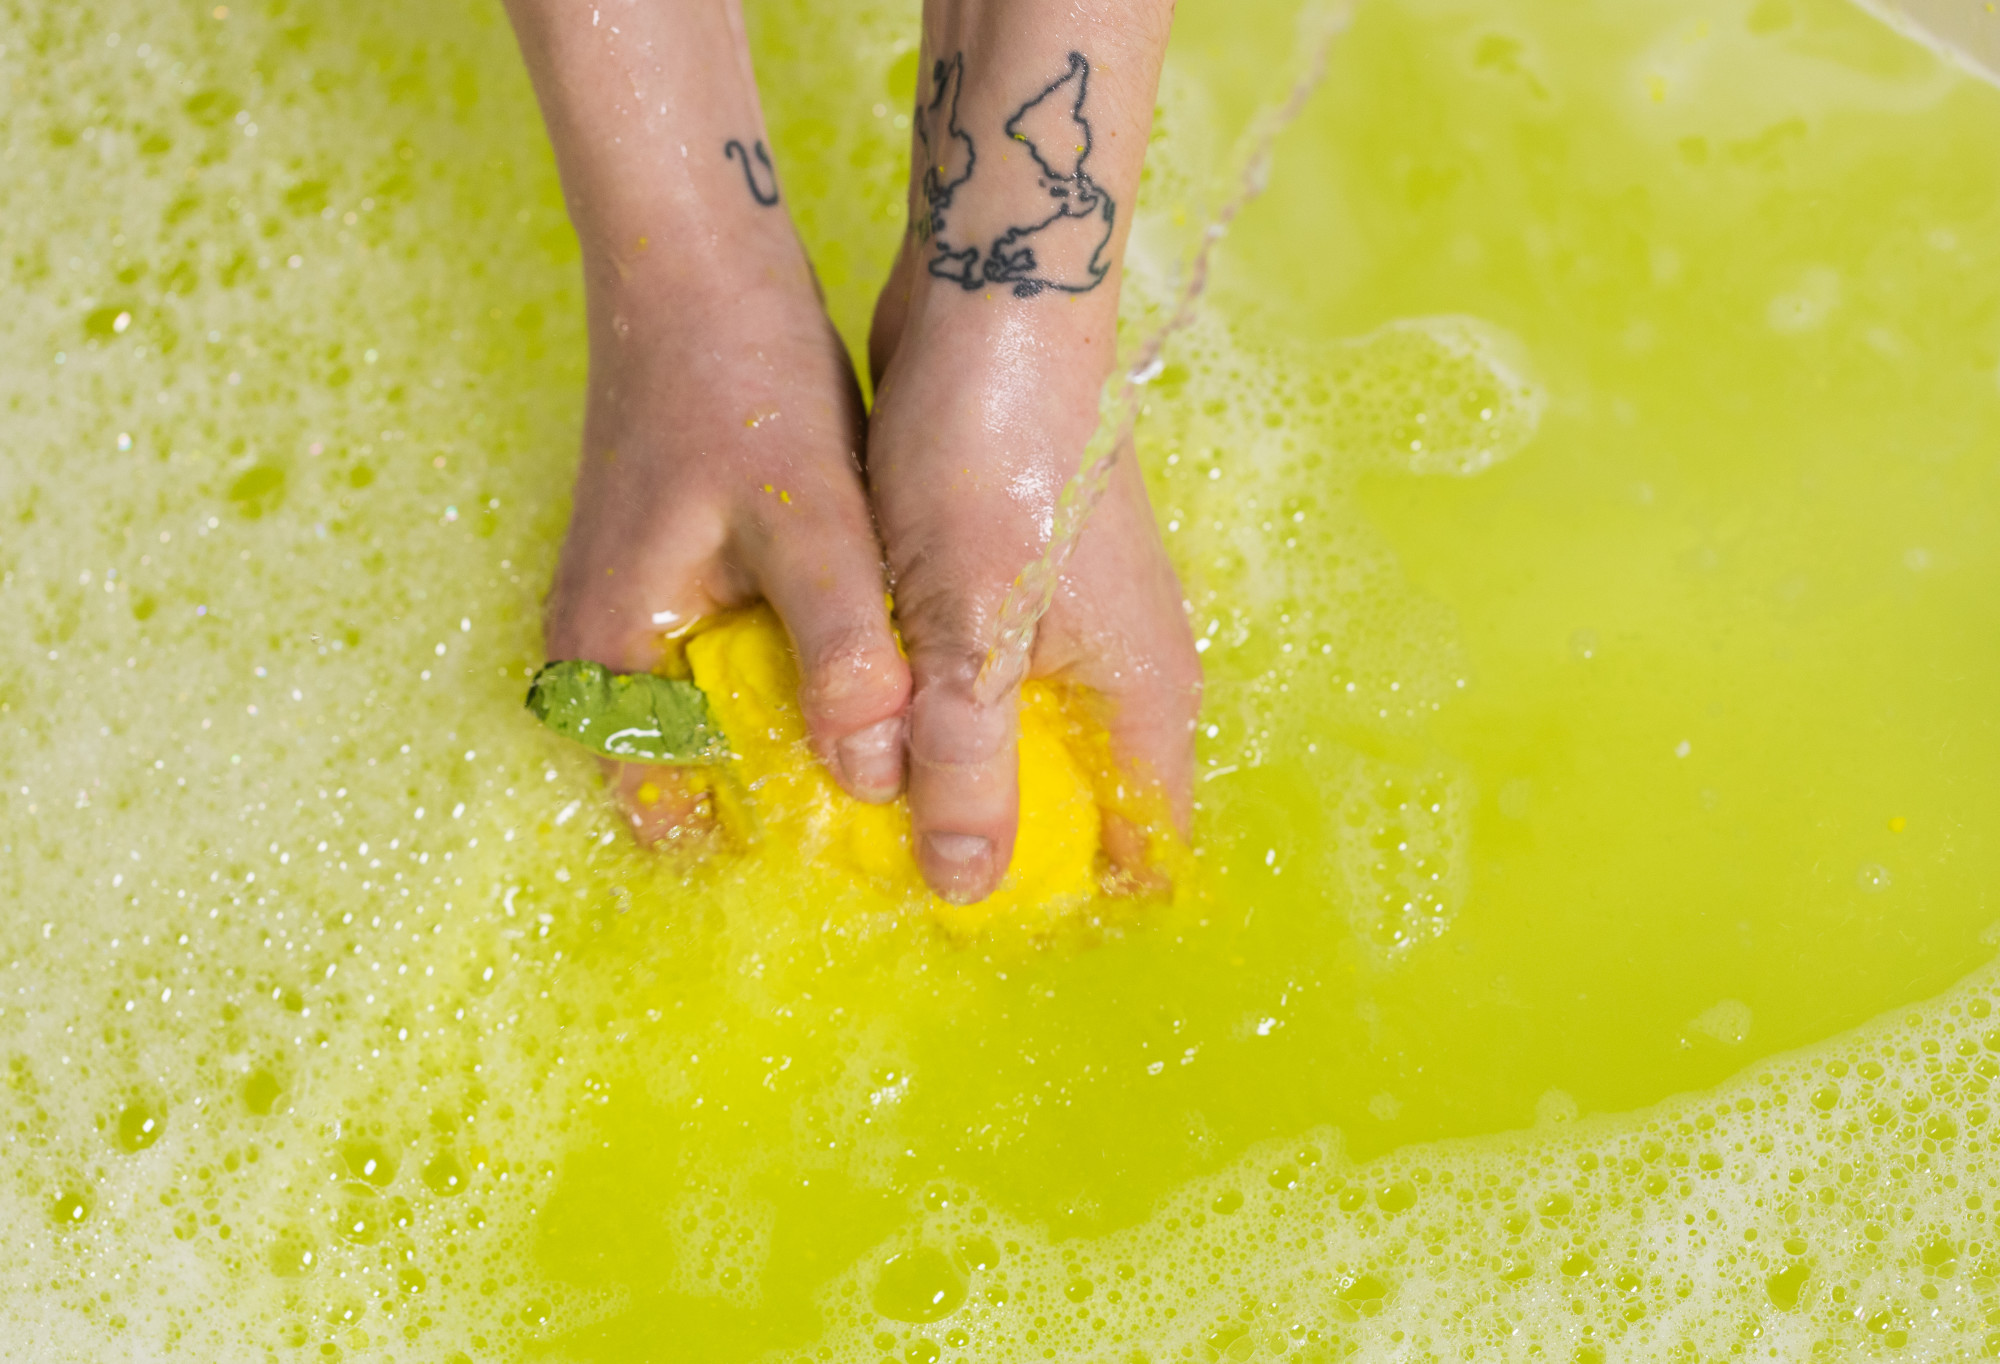 Hands crumbling the yellow Lemon Crumble in water as running water flows over. The water is bright yellow with bubbles forming.